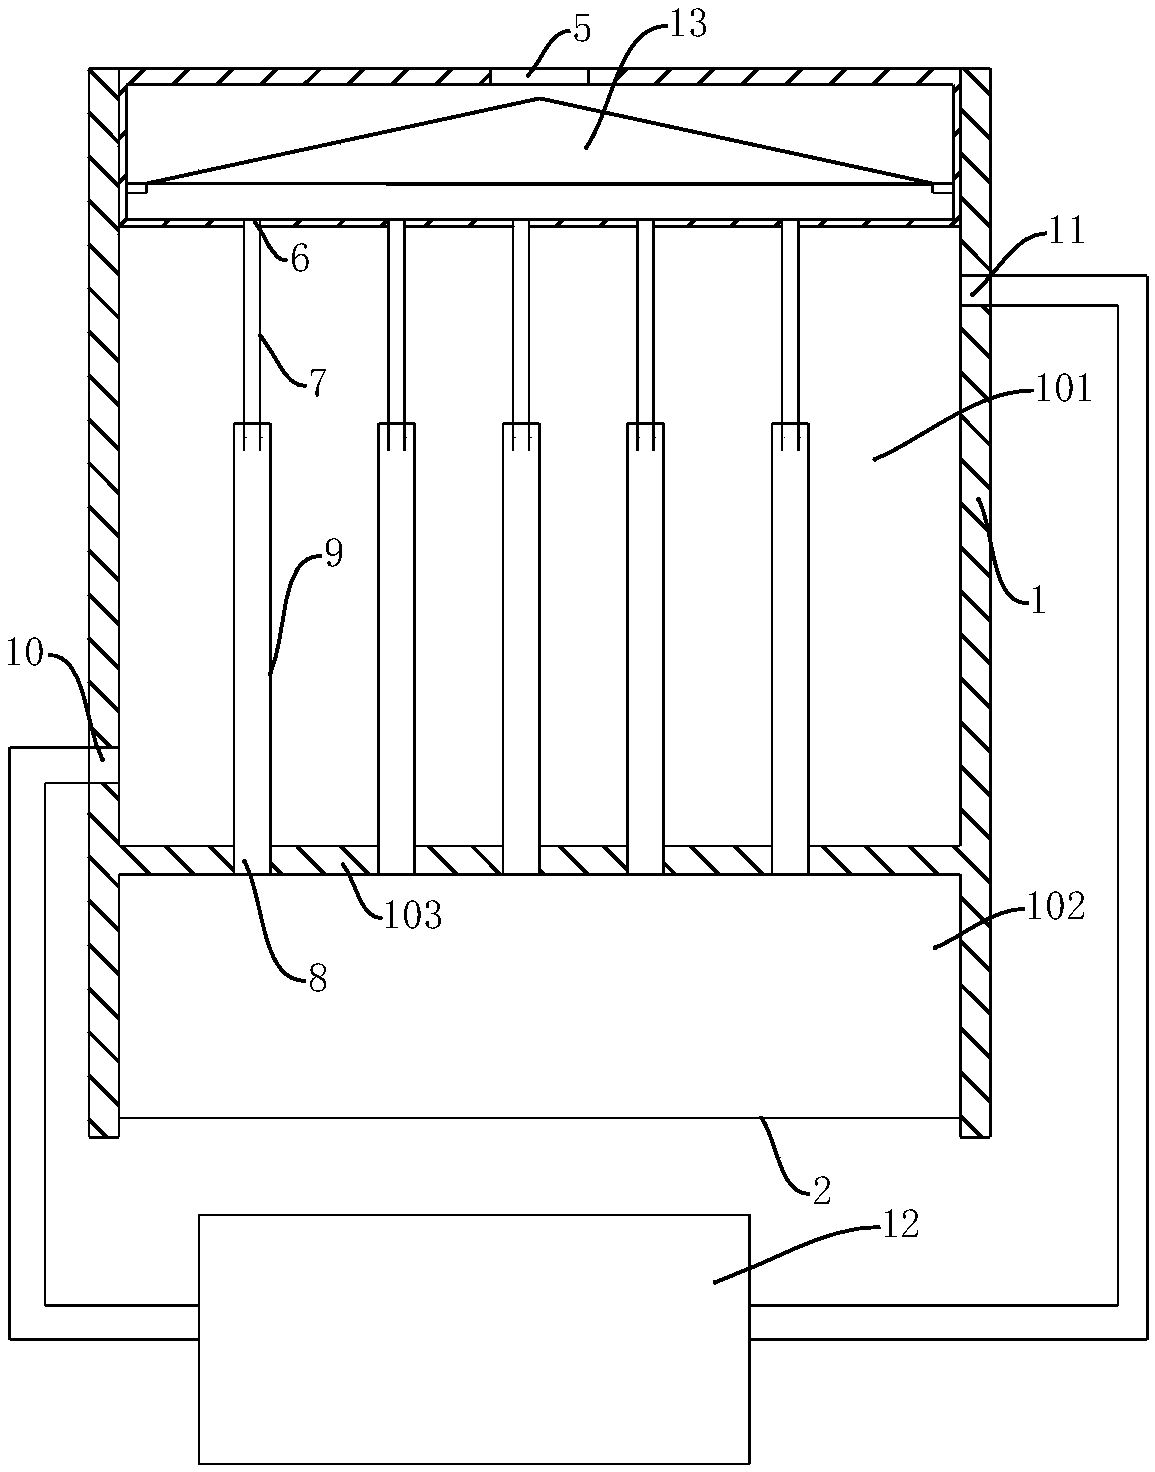 Condensing device for distilling procedure in wine brewing